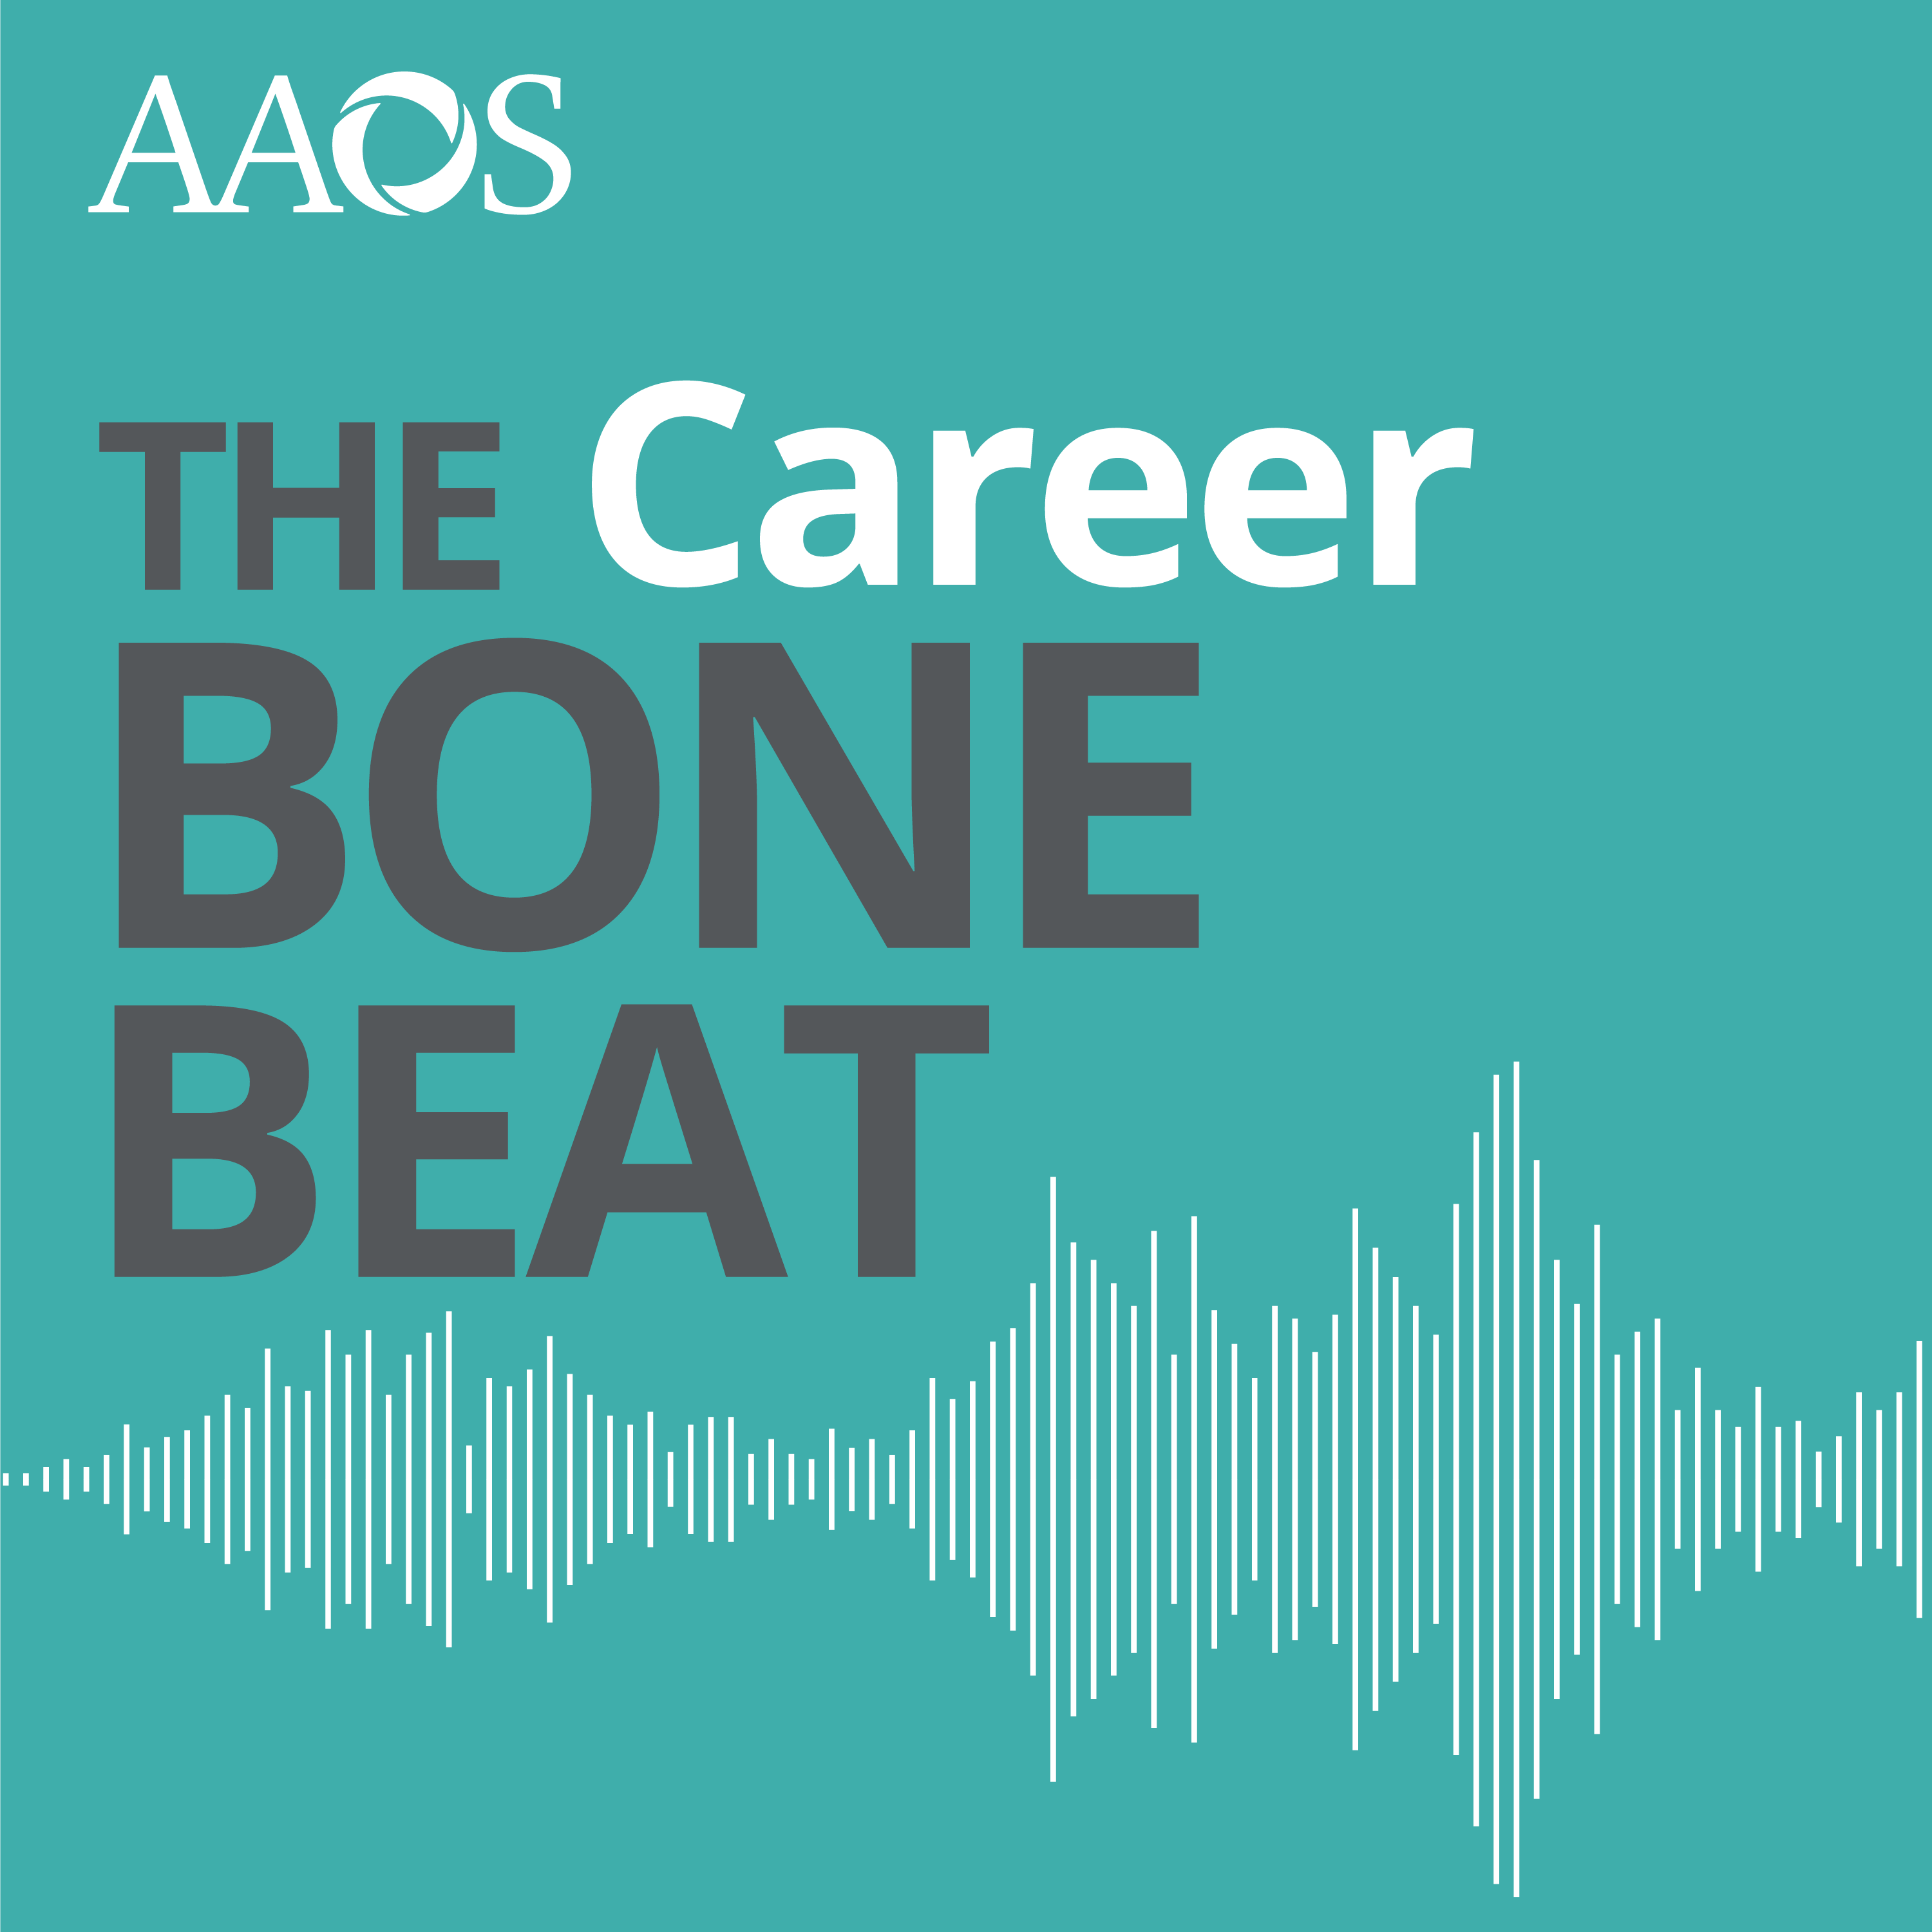 Introducing the AAOS Career Podcast